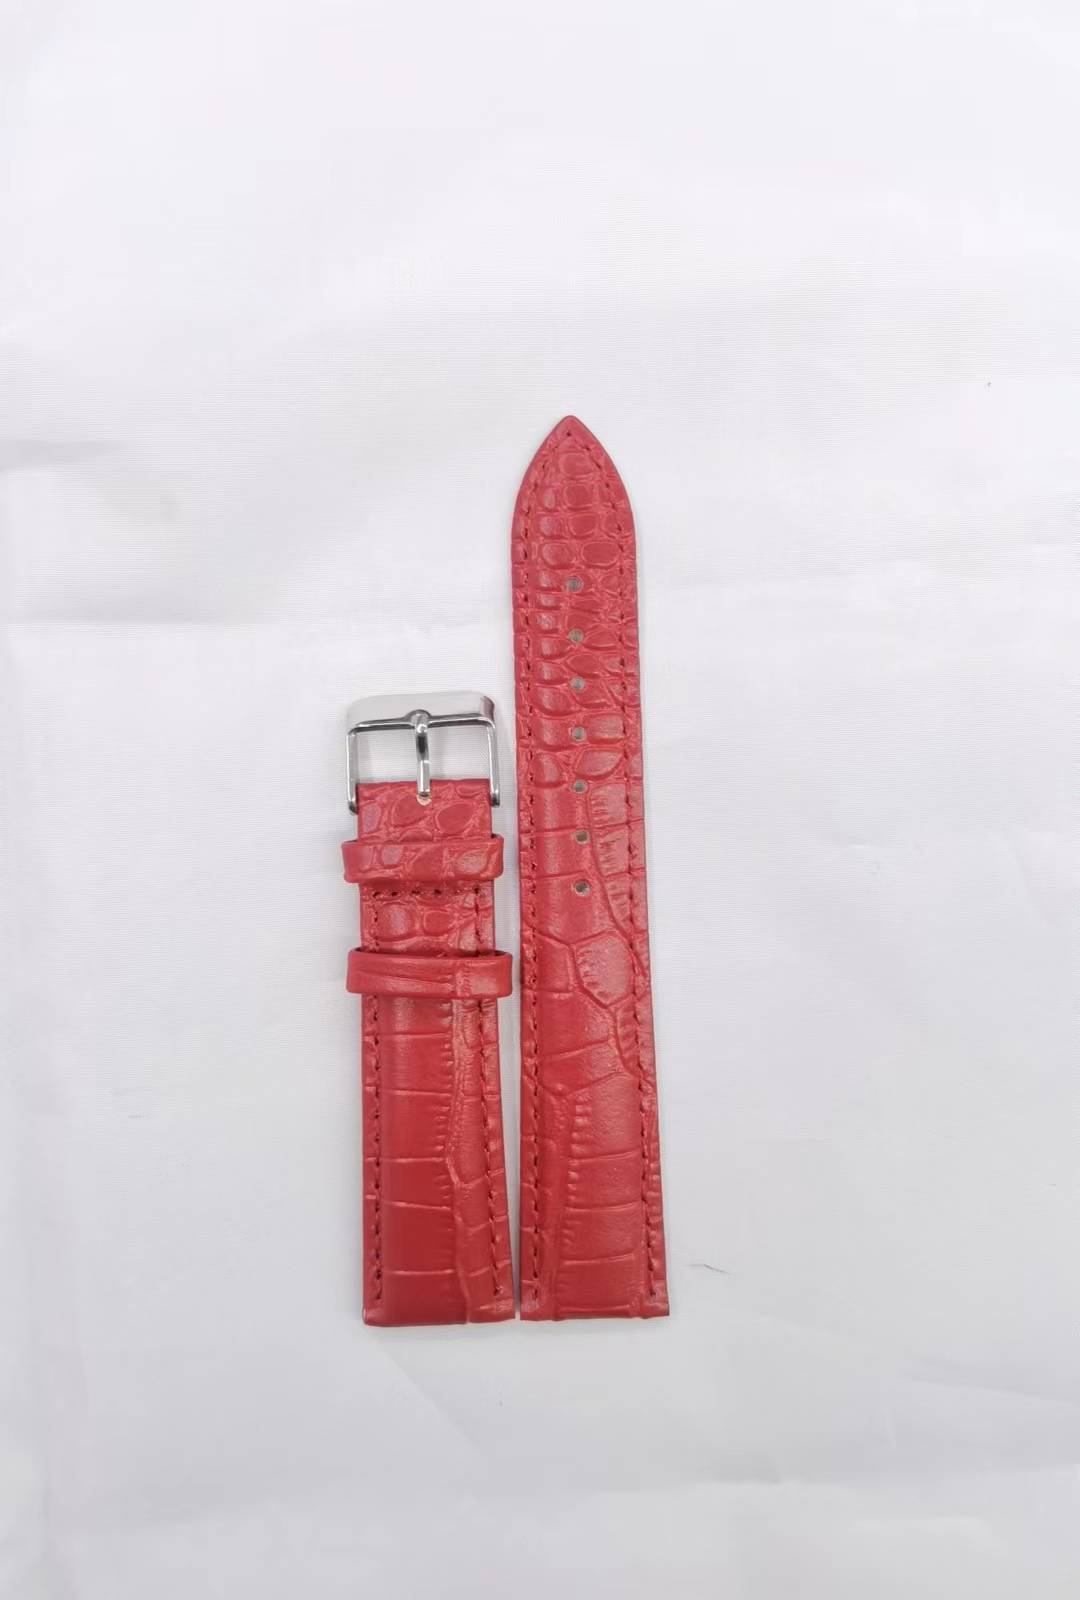 Factory Spot Direct Supply Watchband Small Cowhide Crocodile Pattern Watchband Color Leather Watchband 12-22